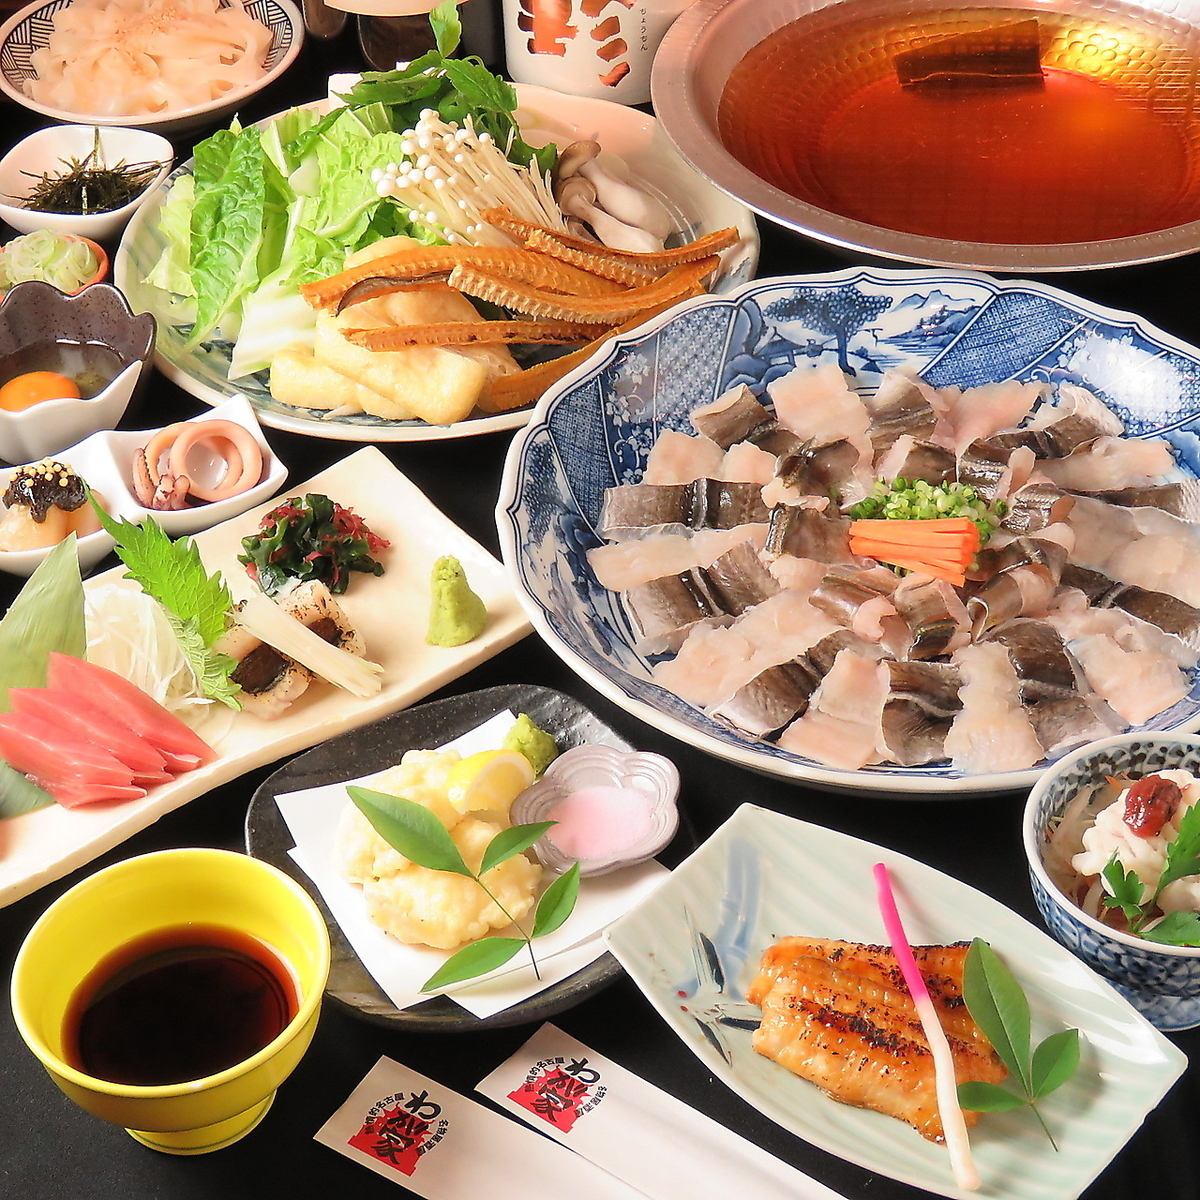 We also have Nagoya meal courses♪